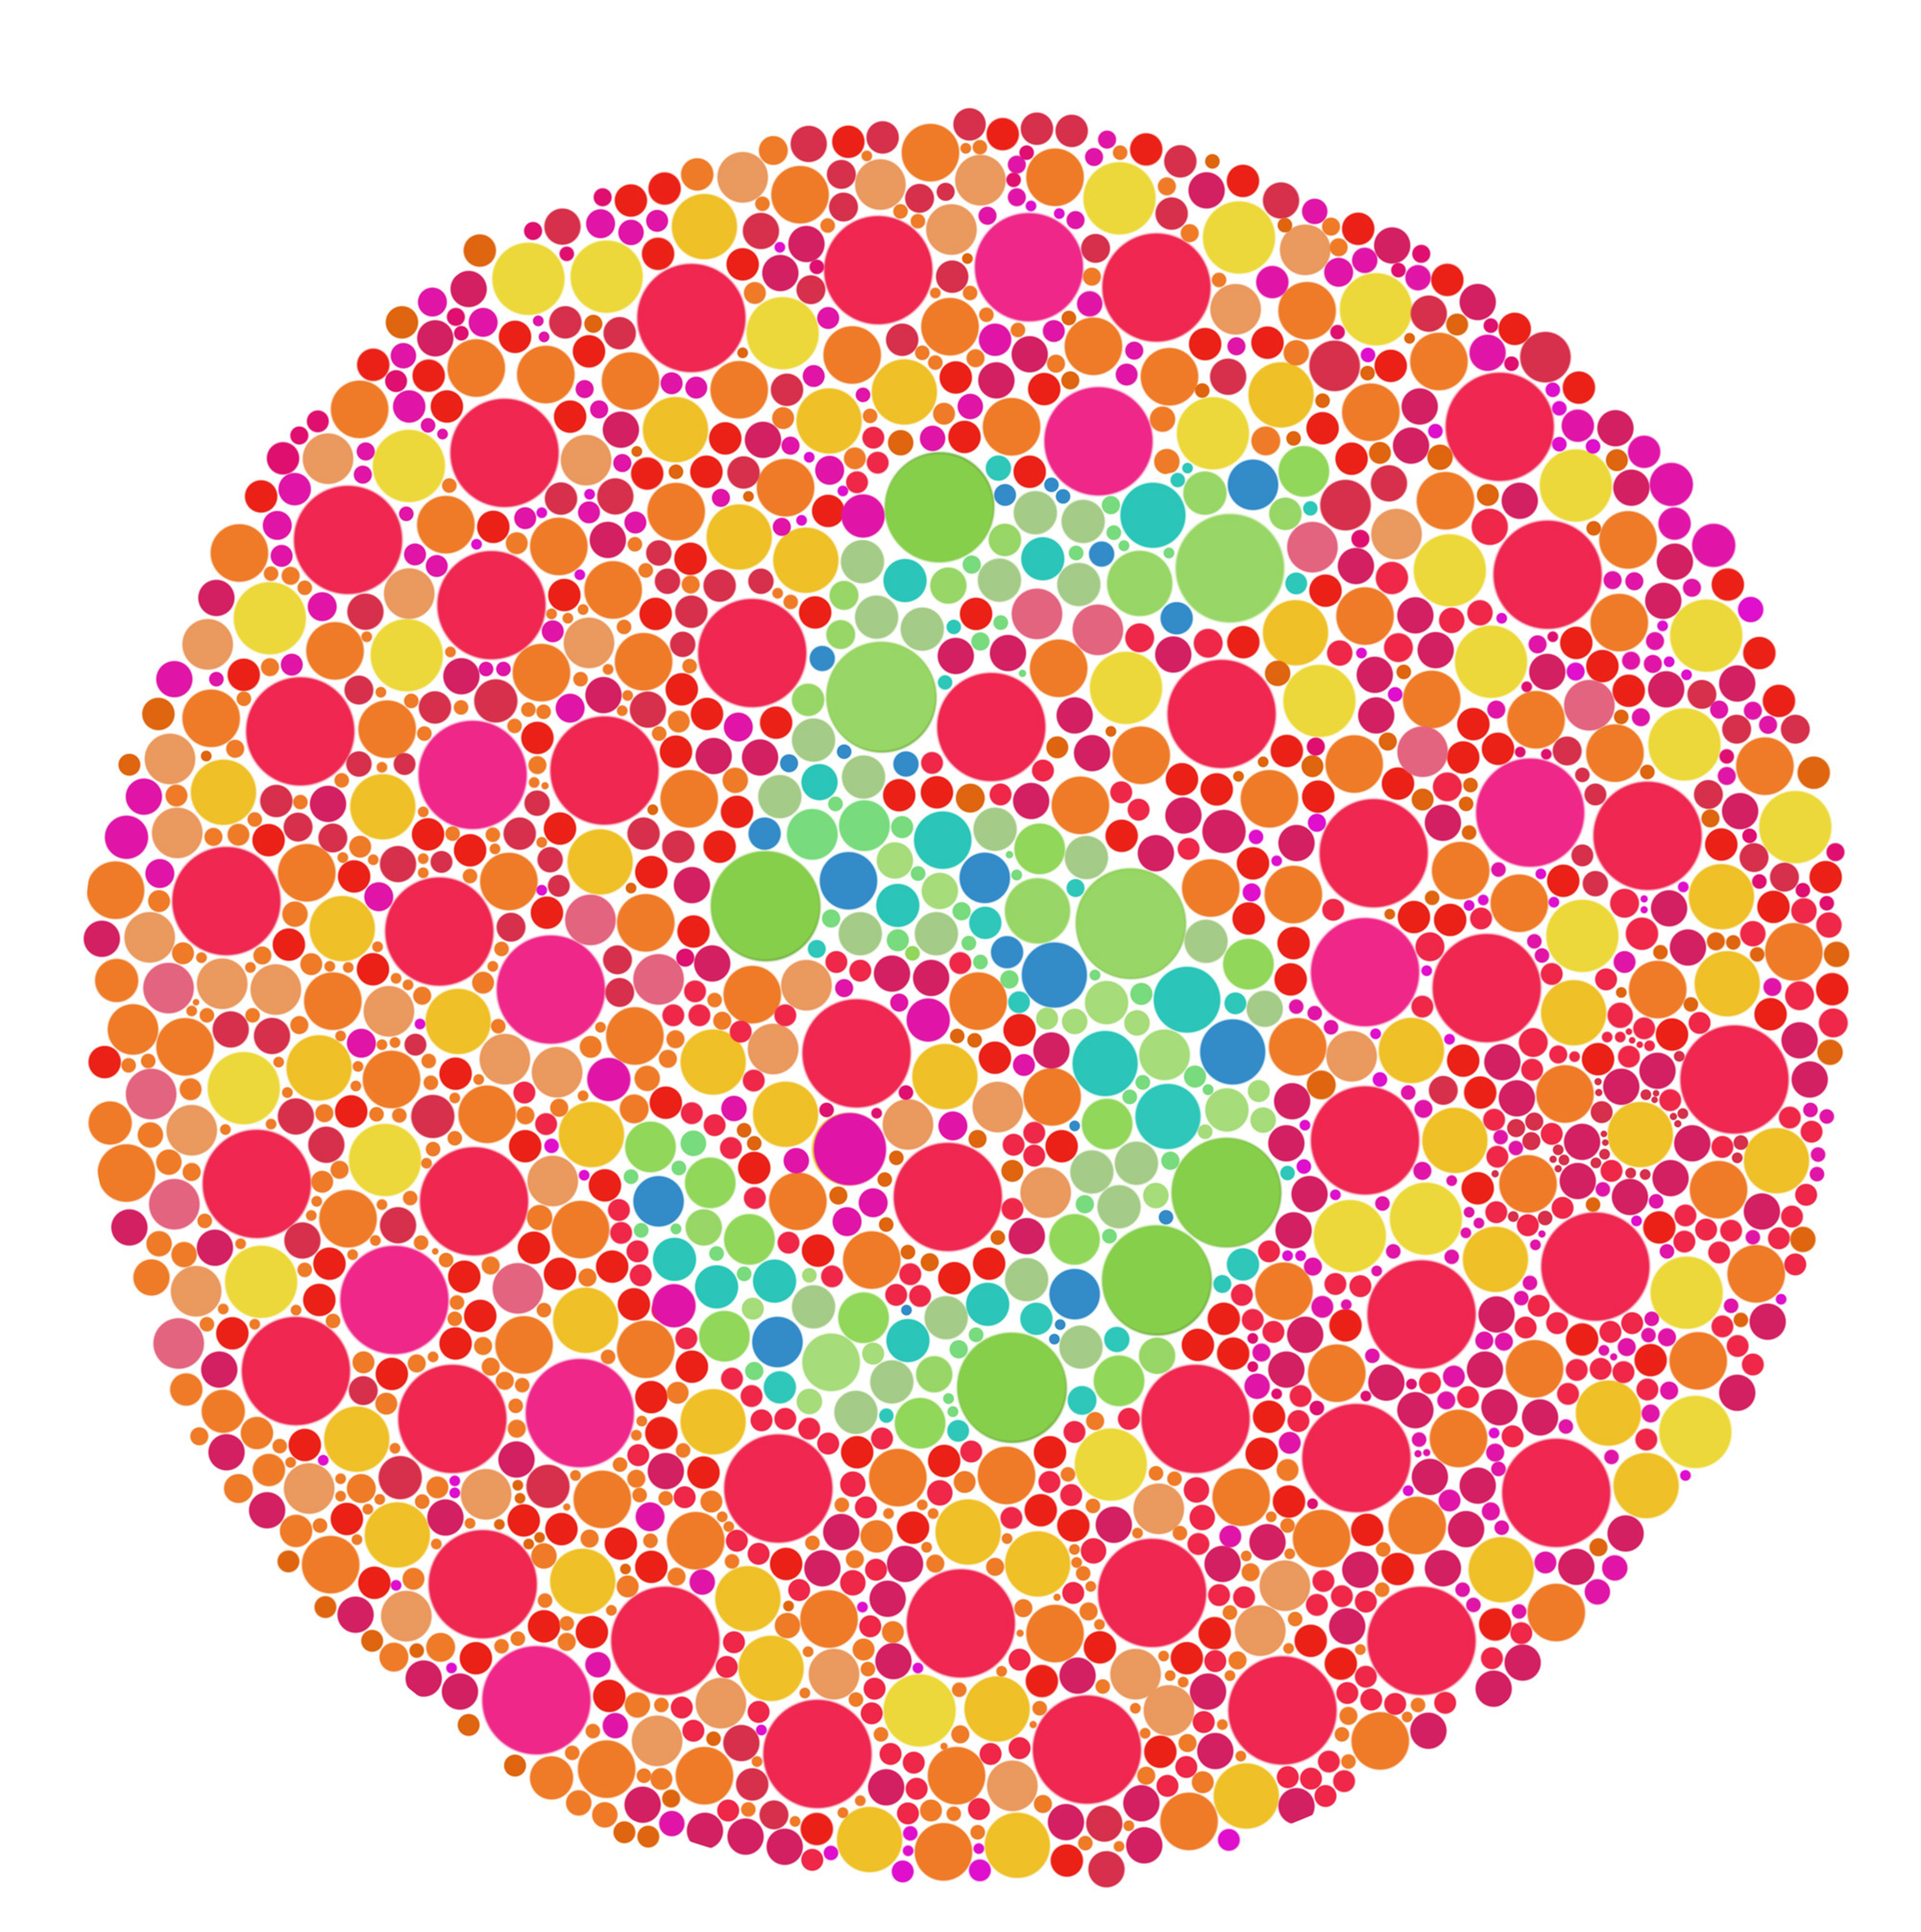 An Ishihara color vision test plate may not show the number 5 if you have a certain type of color deficiency